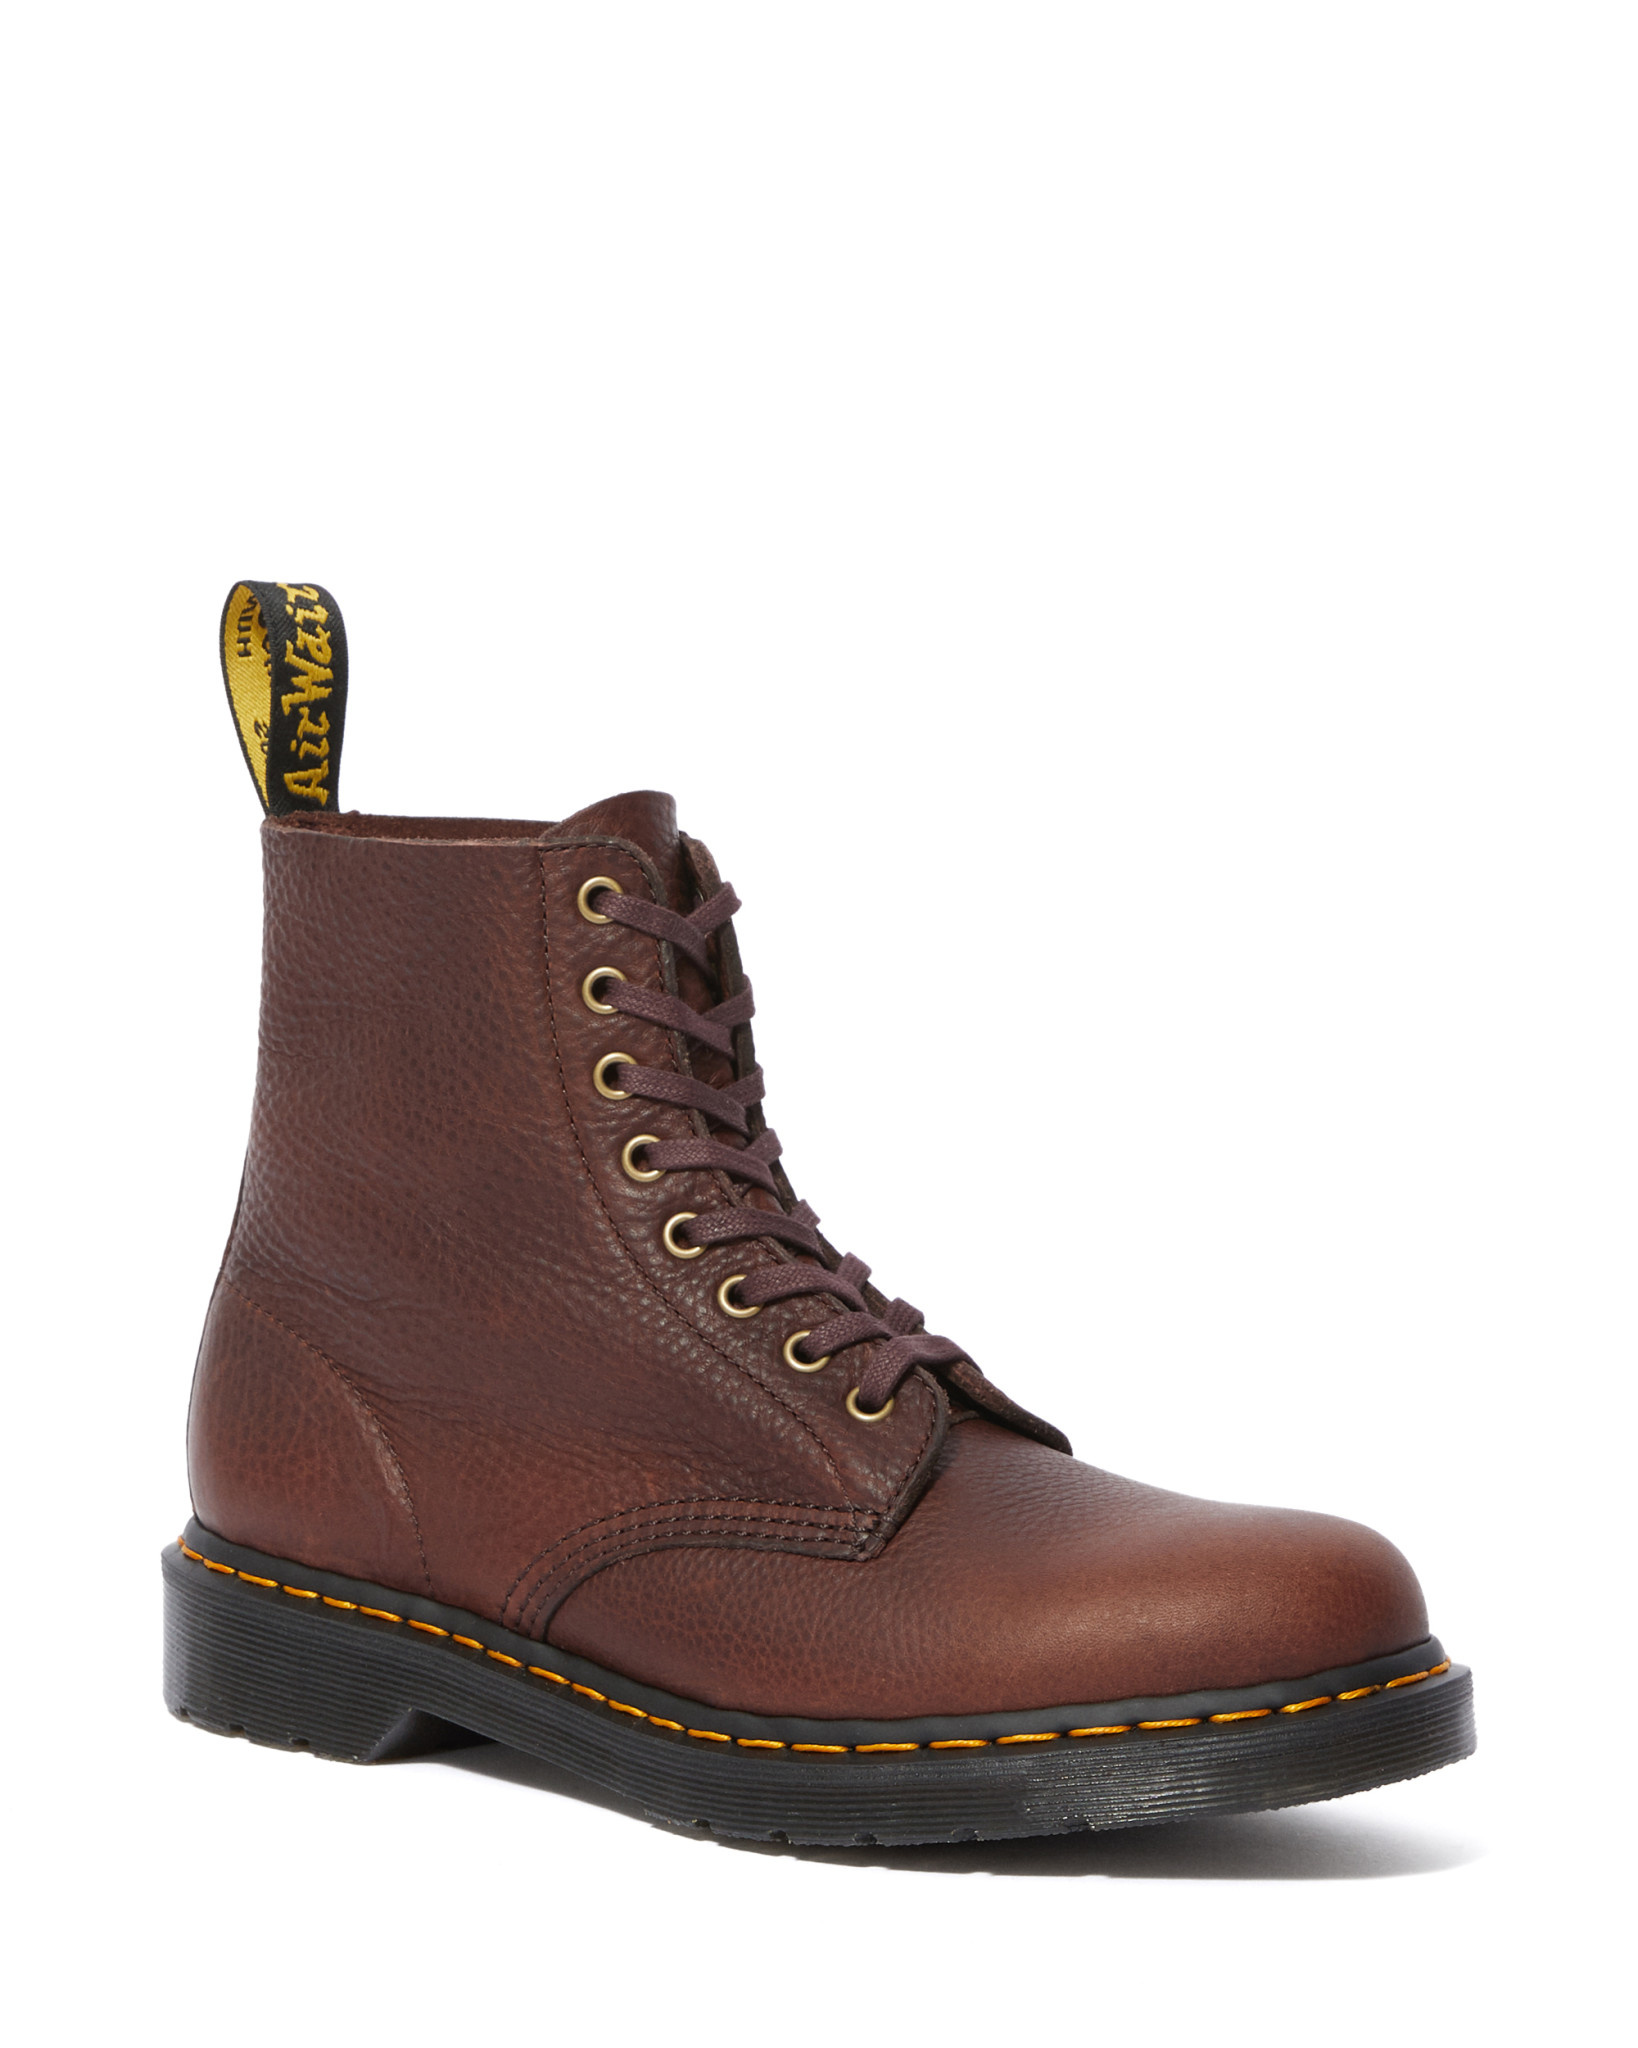 X20 RIO Montreal Dr Martens Canada, footwear Boots4all 